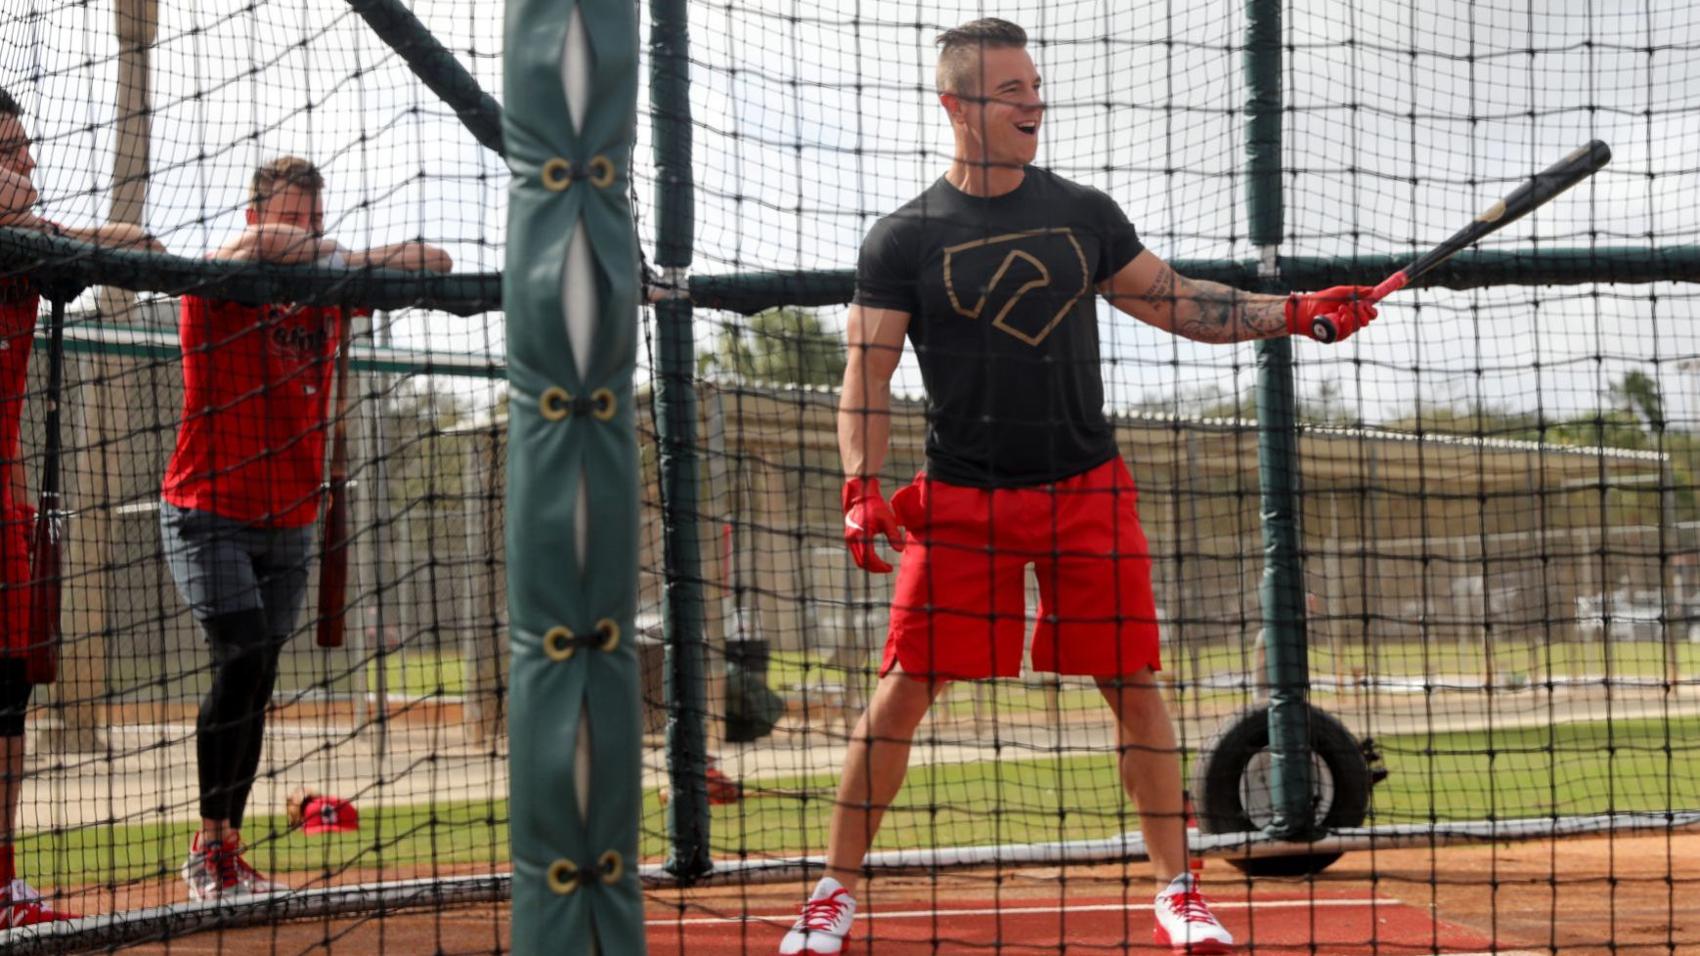 Hochman: Cardinals' Tyler O'Neill lost some bulk, in hopes his overall hitting will improve